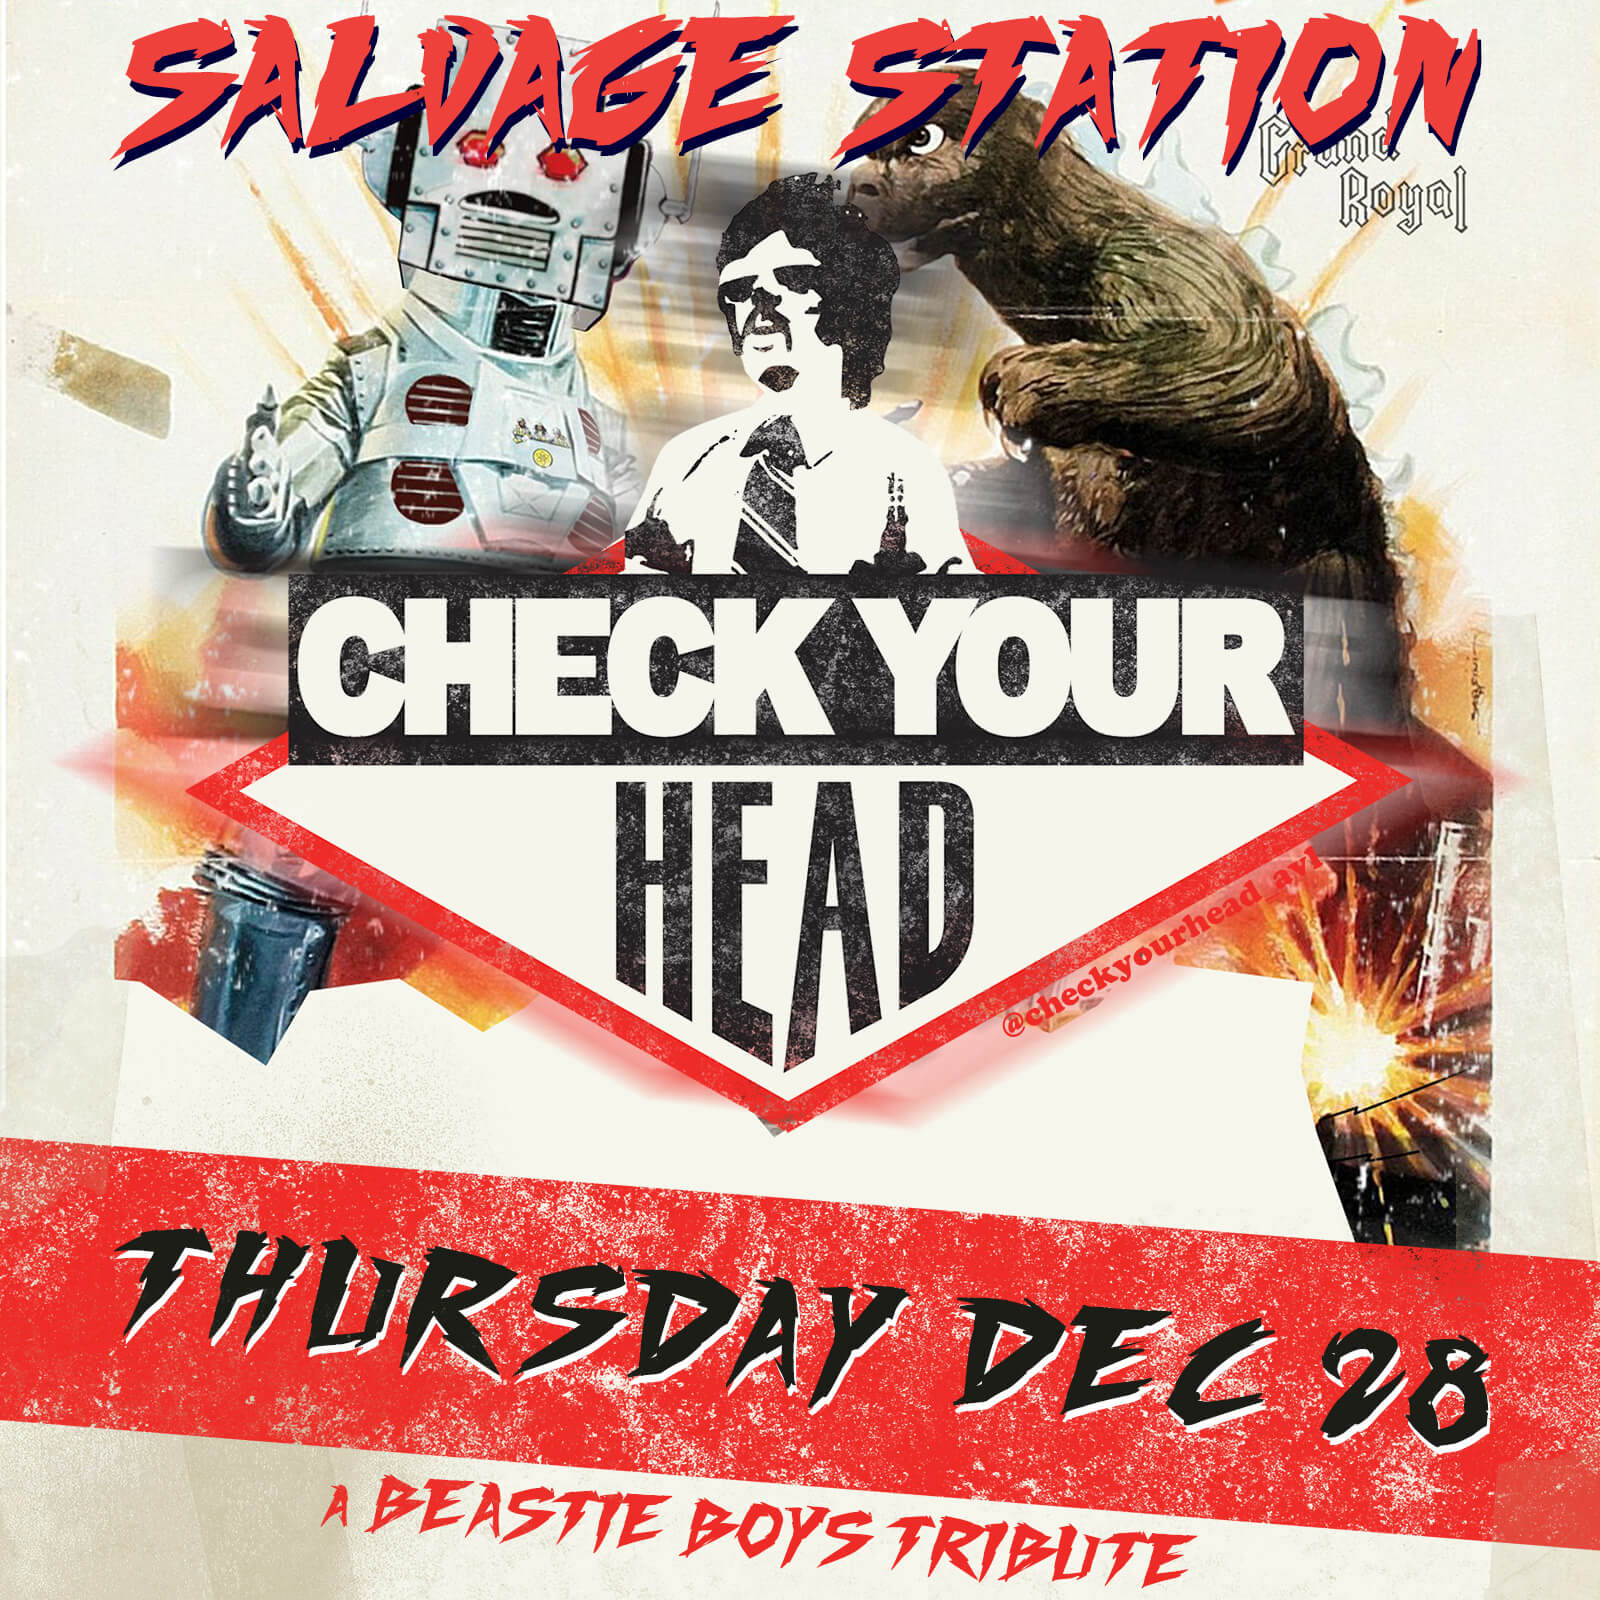 Check Your Head – A Beastie Boys Tribute